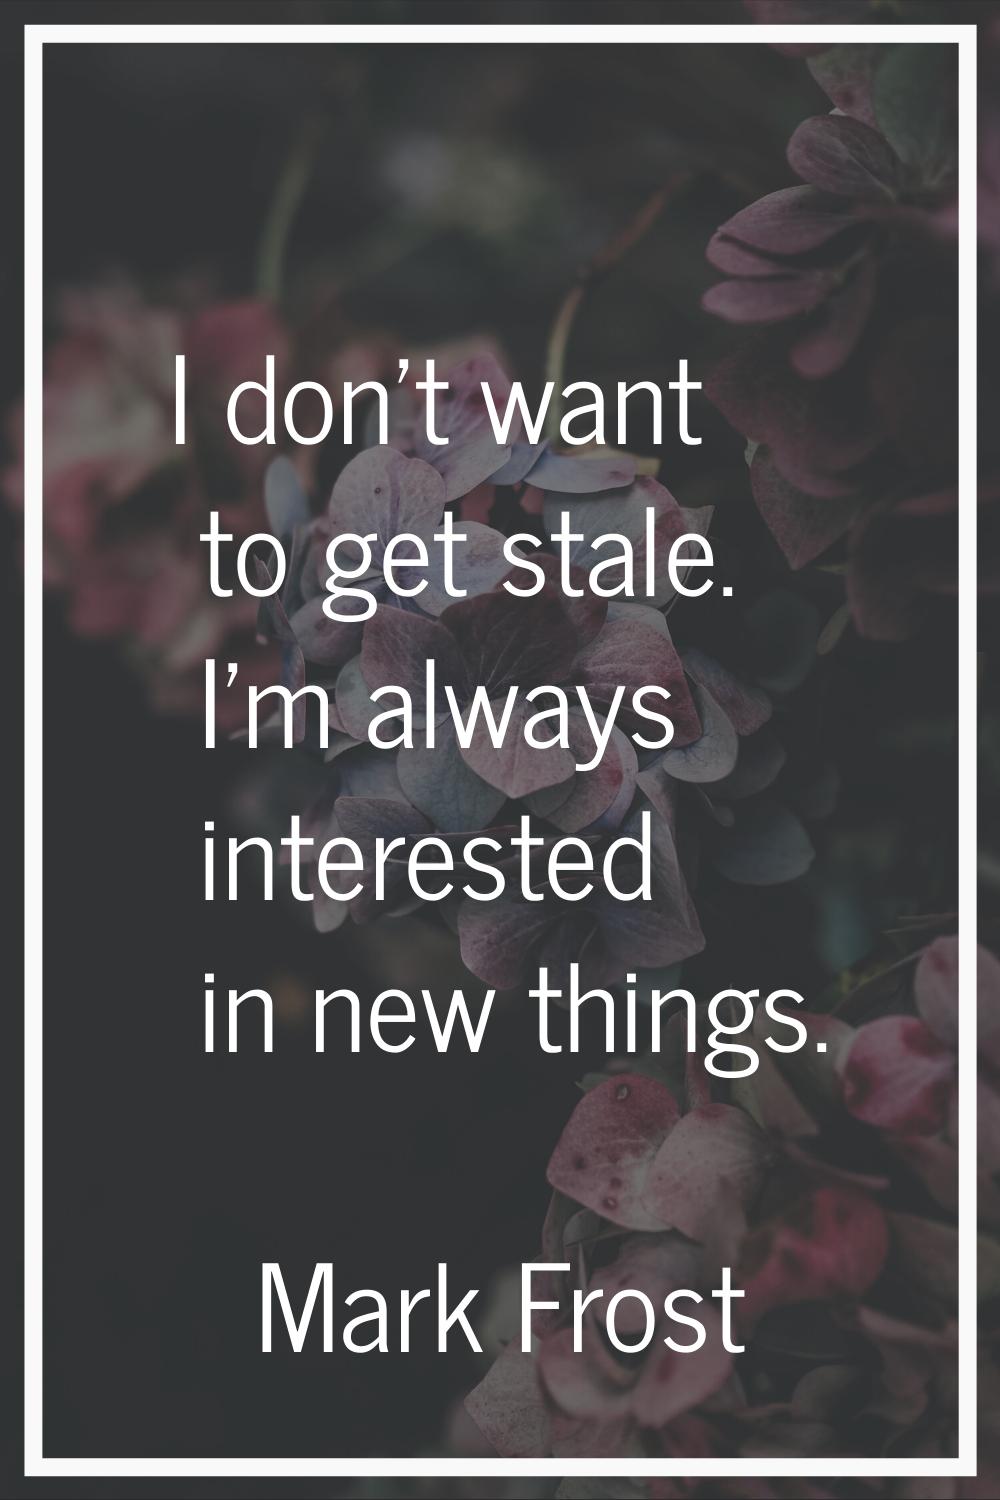 I don't want to get stale. I'm always interested in new things.